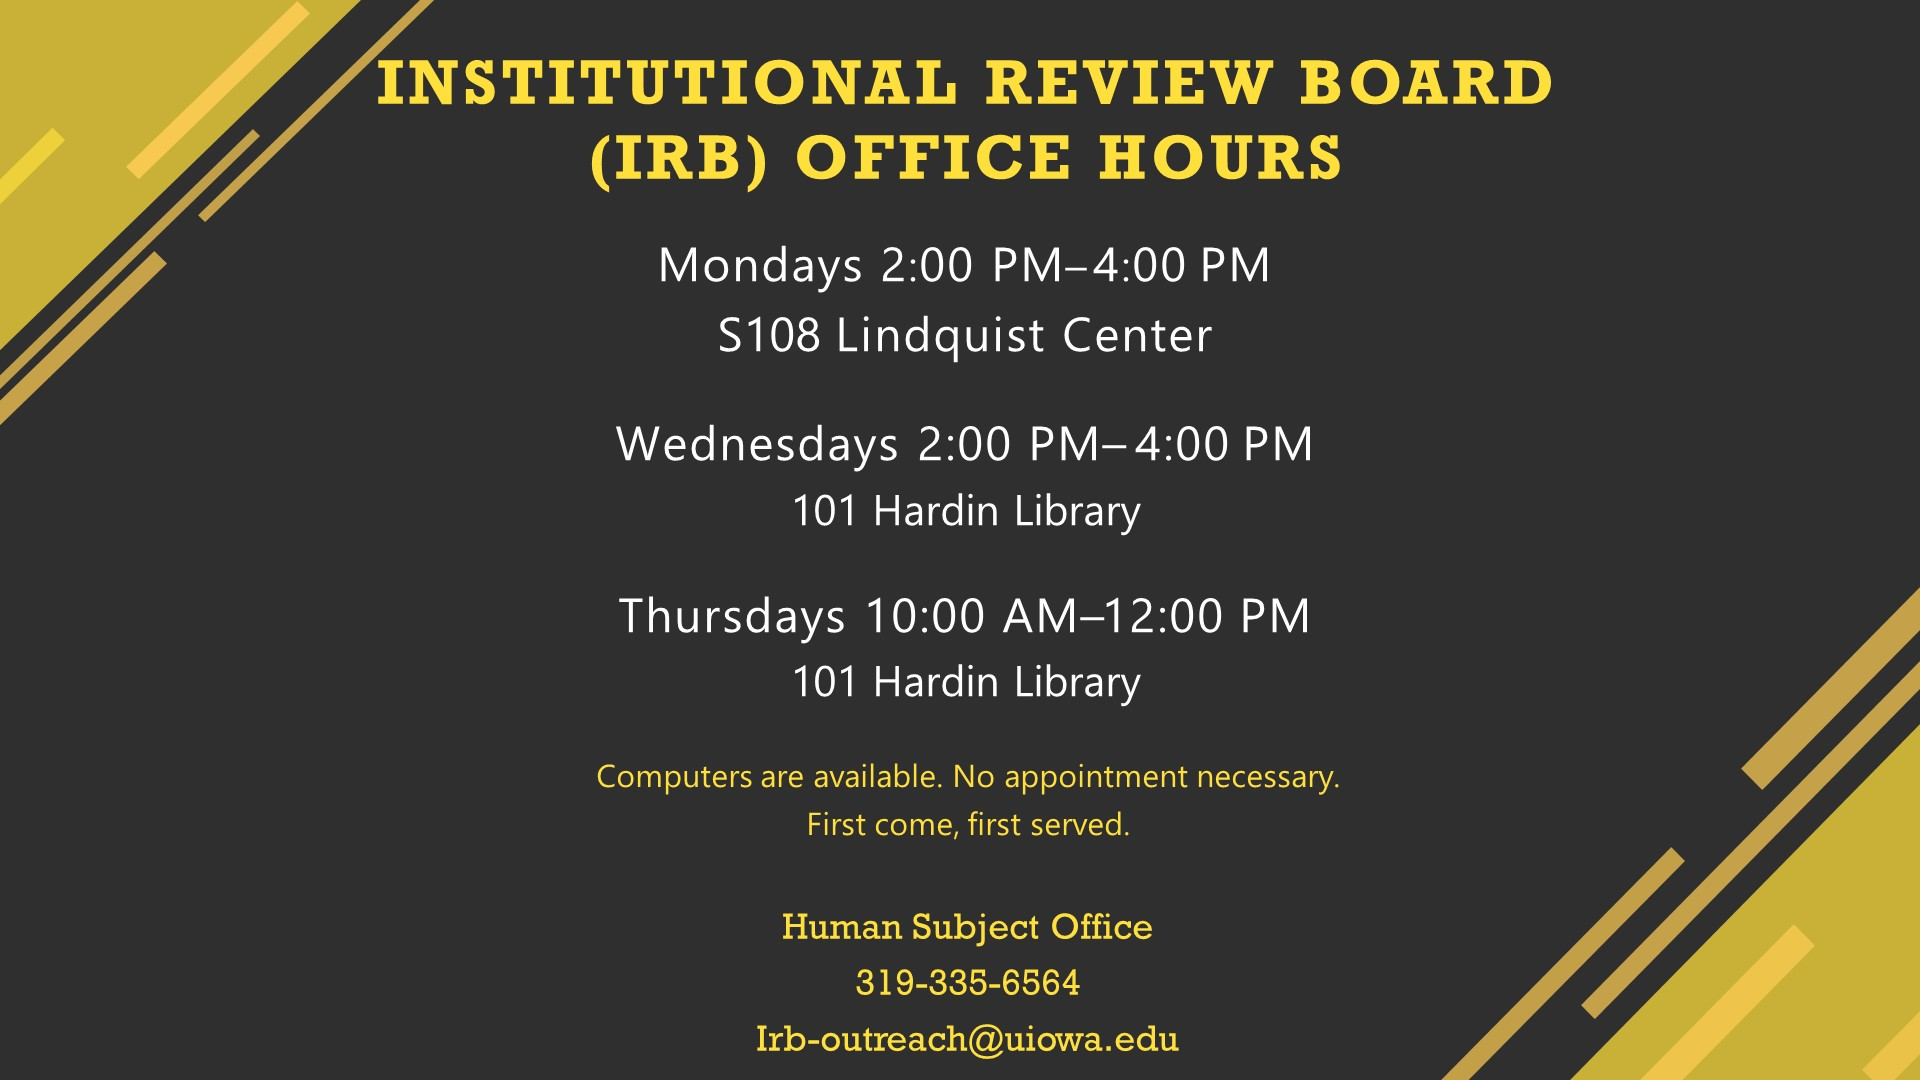 irb office hours